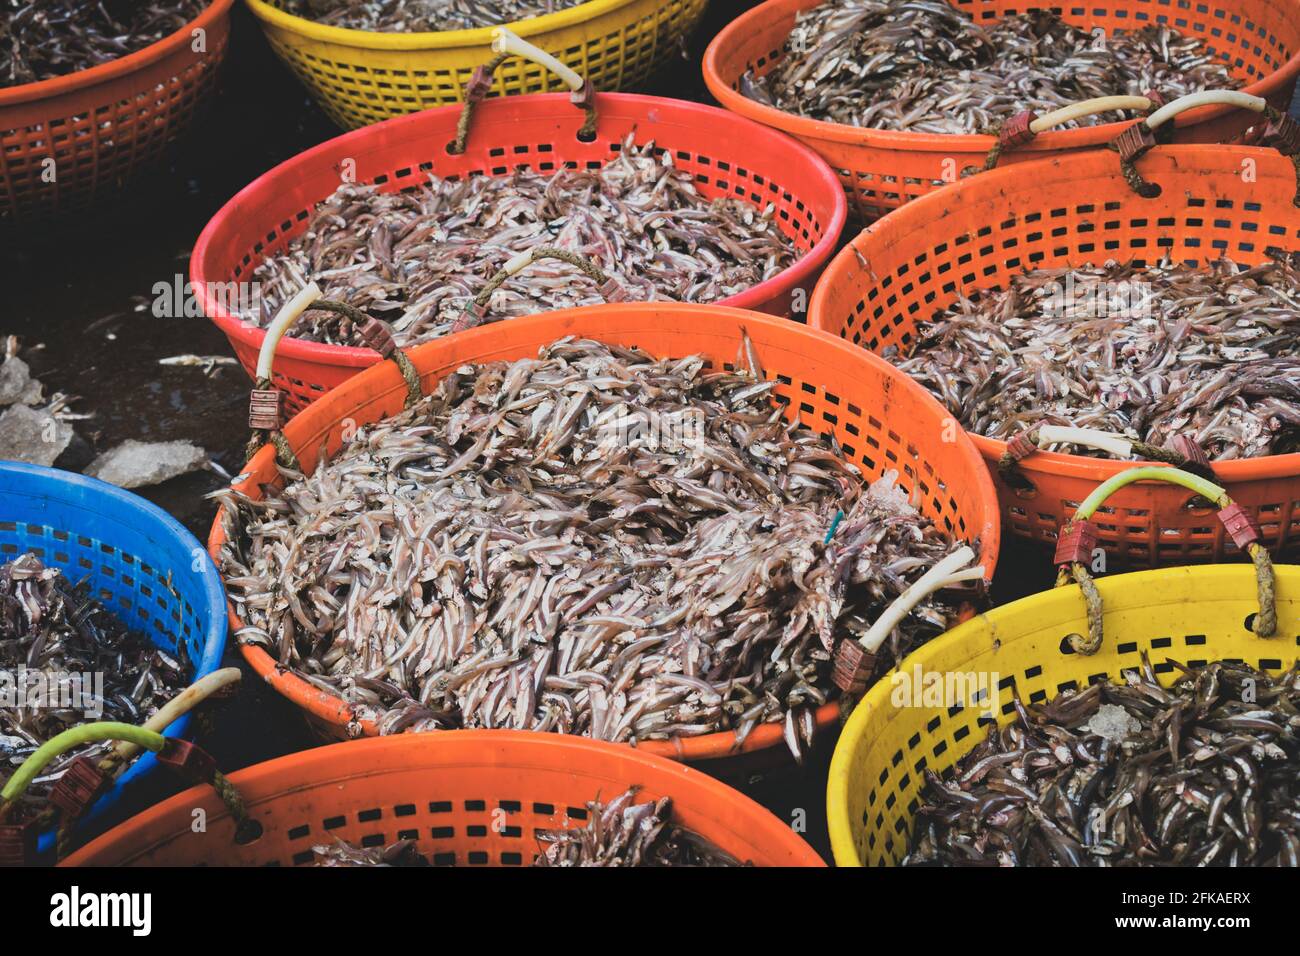 Collection of Anchoviella lepidentostole fish in various fish containers for sale in the market. Stock Photo